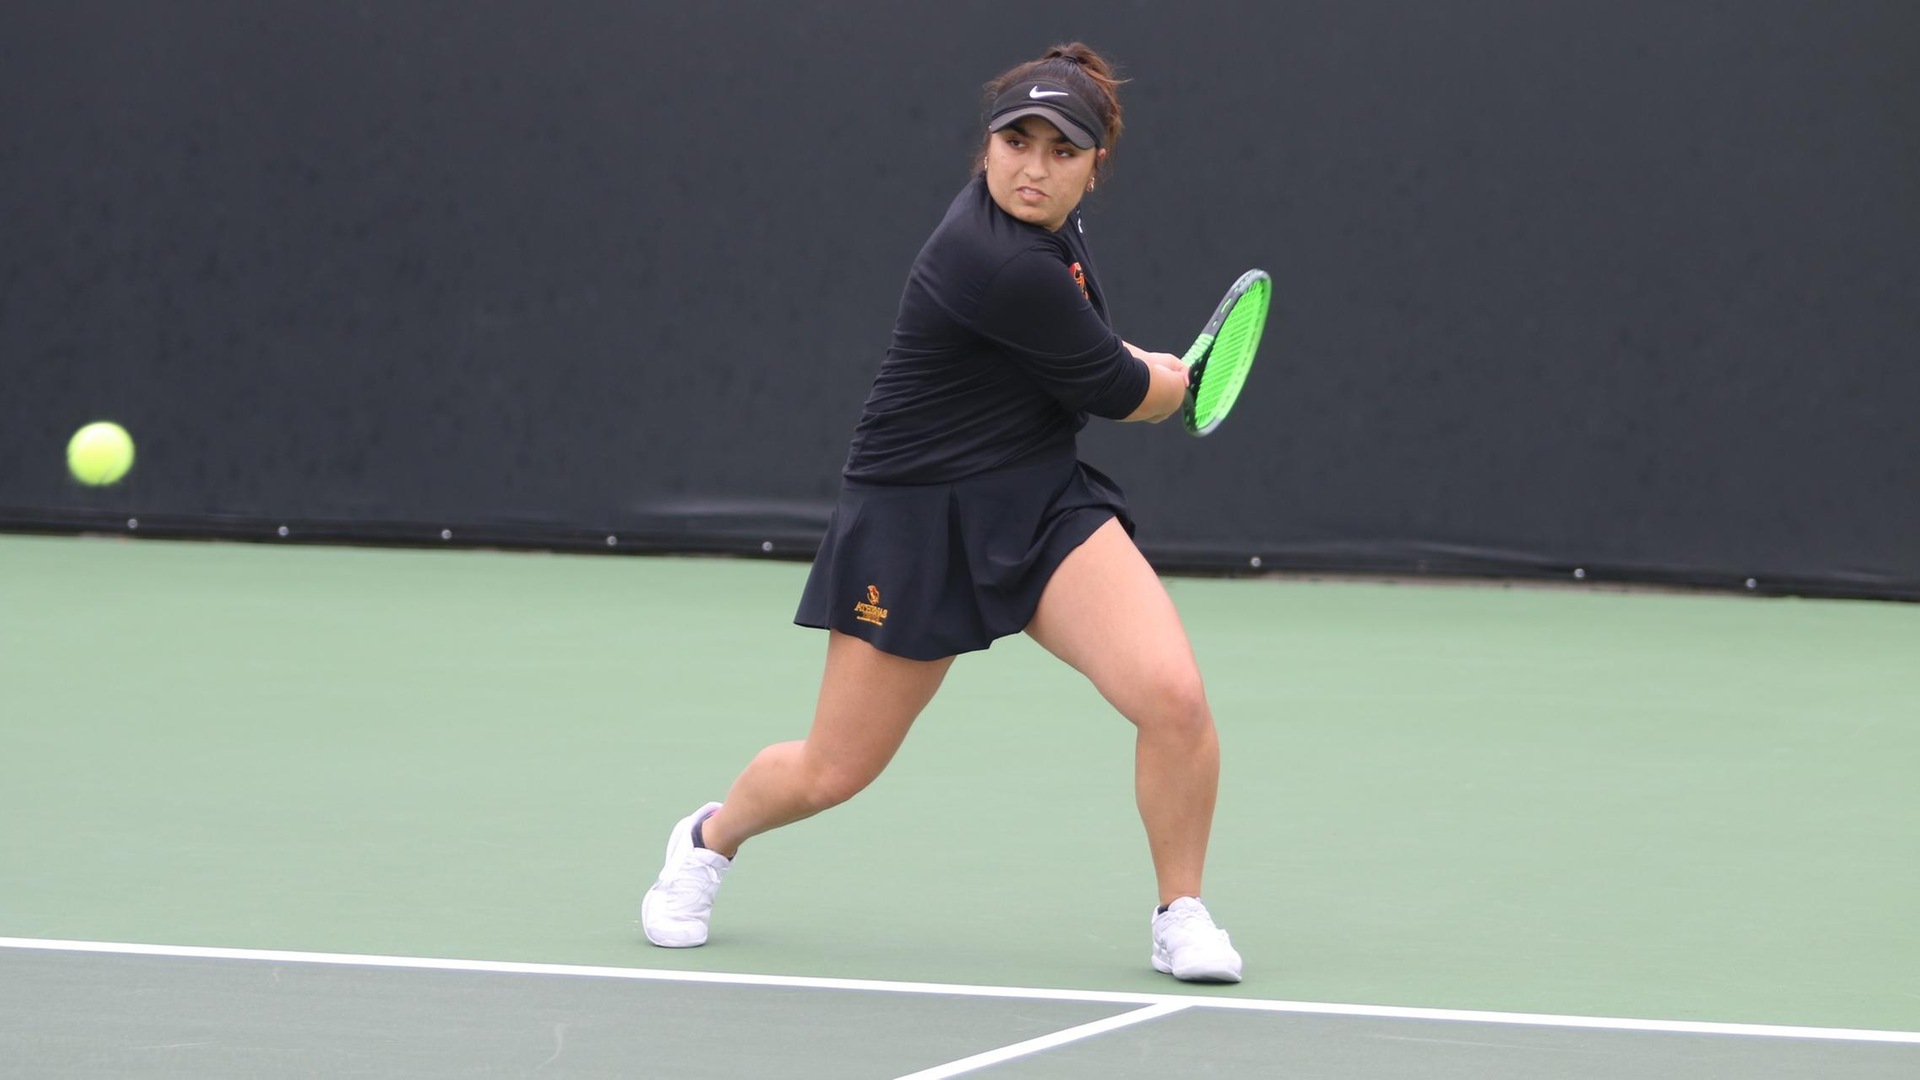 Alisha Chulani will compete in both singles and doubles at the NCAA Championships